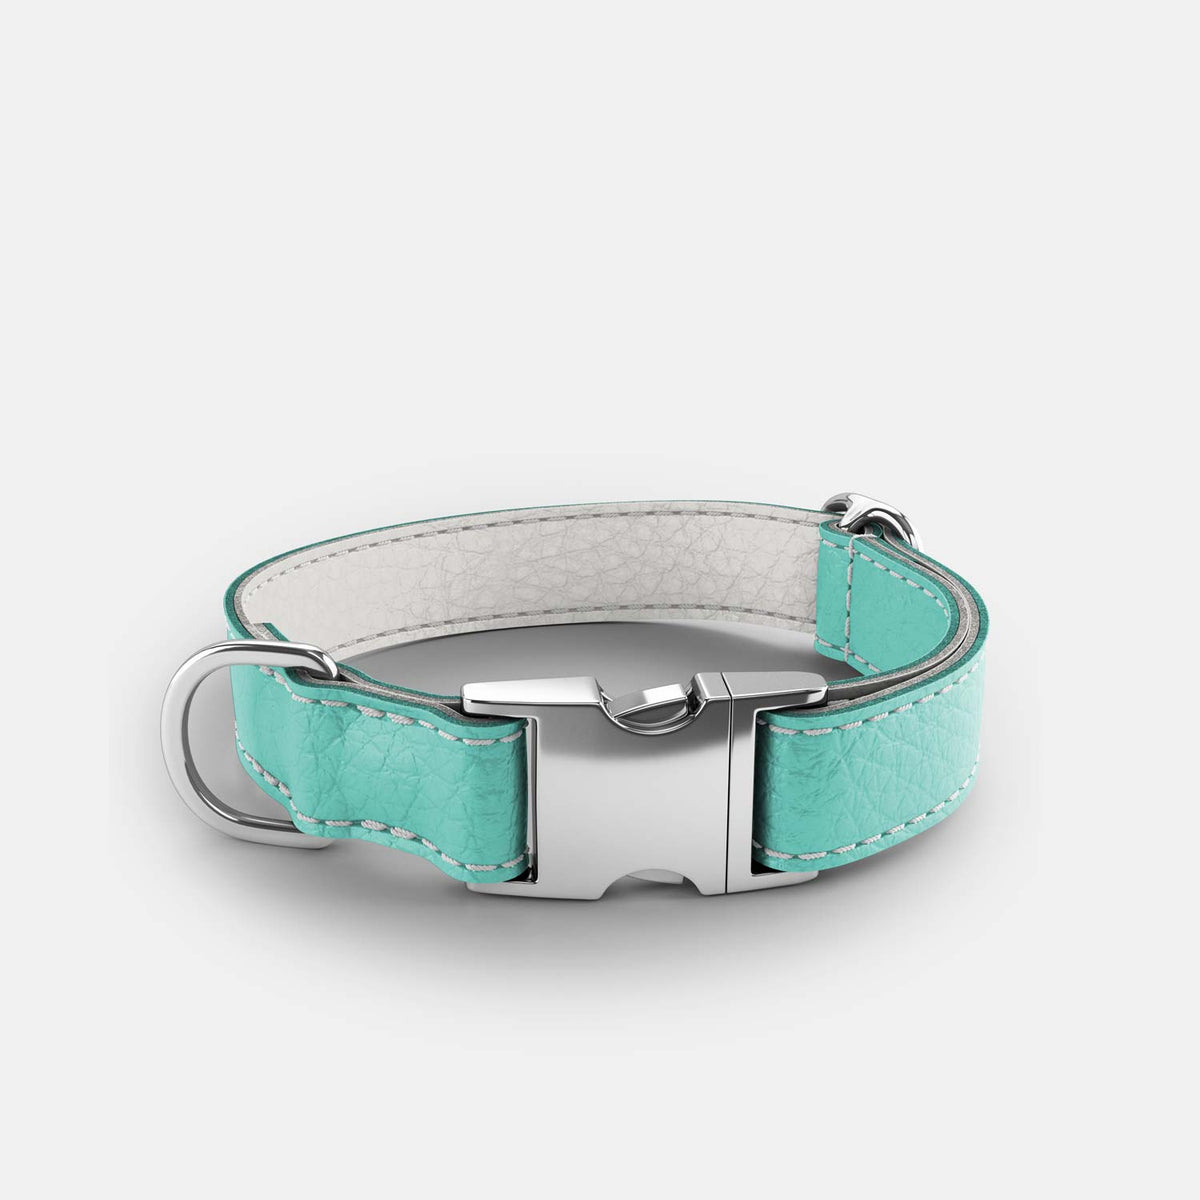 Leather Dog Collar - Light Blue and Off-white